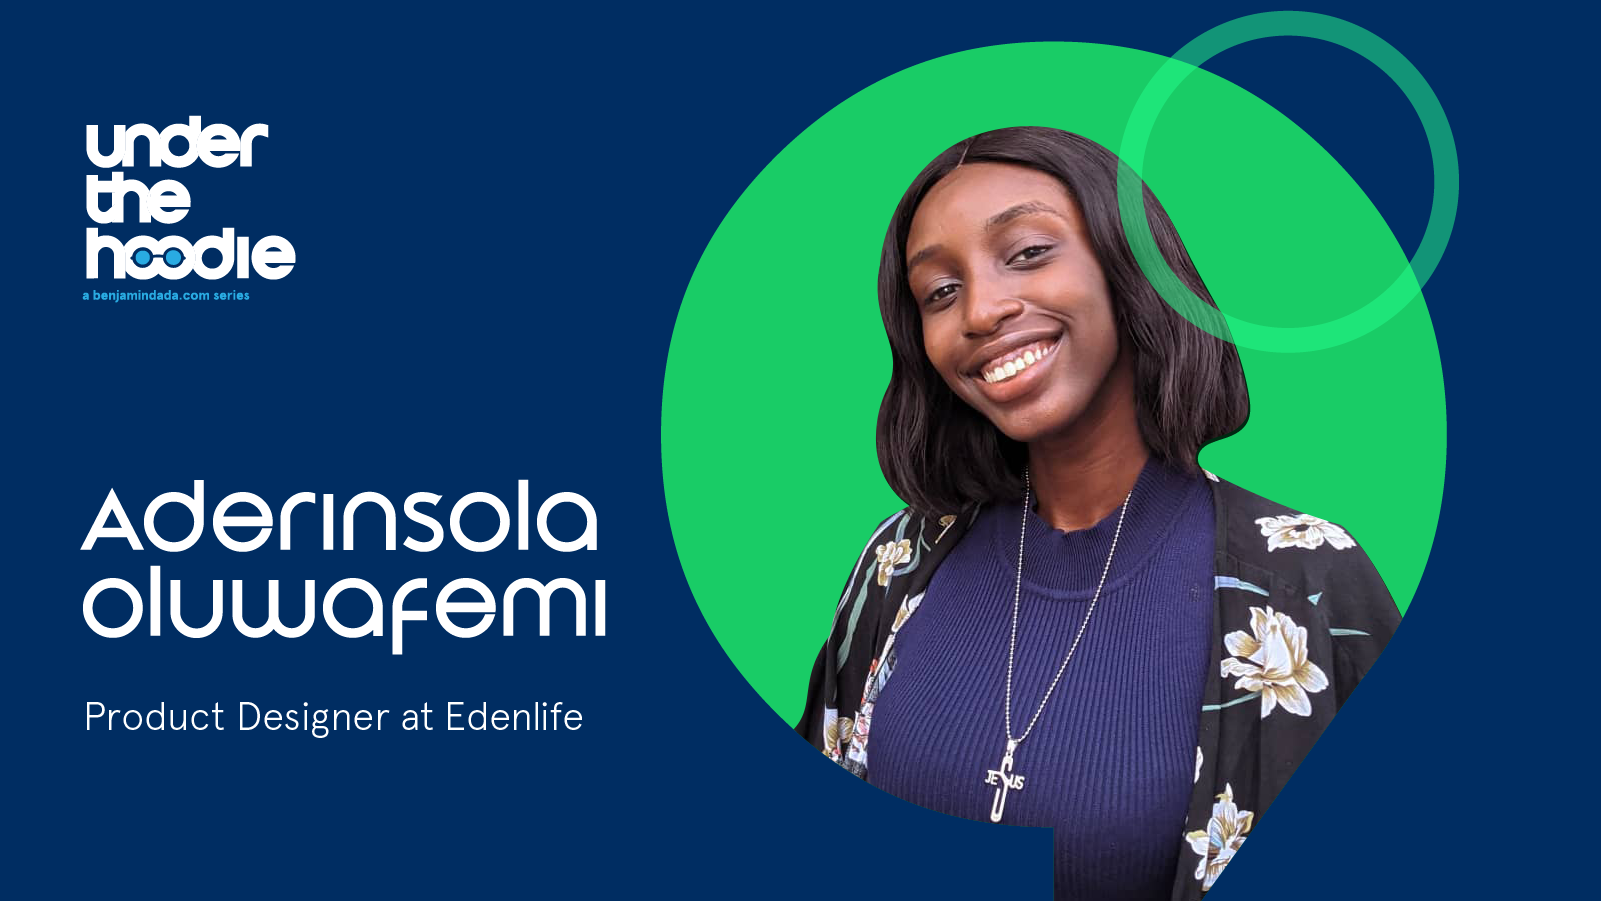 Under The Hoodie - Aderinsola Oluwafemi, Product Designer at Eden Life